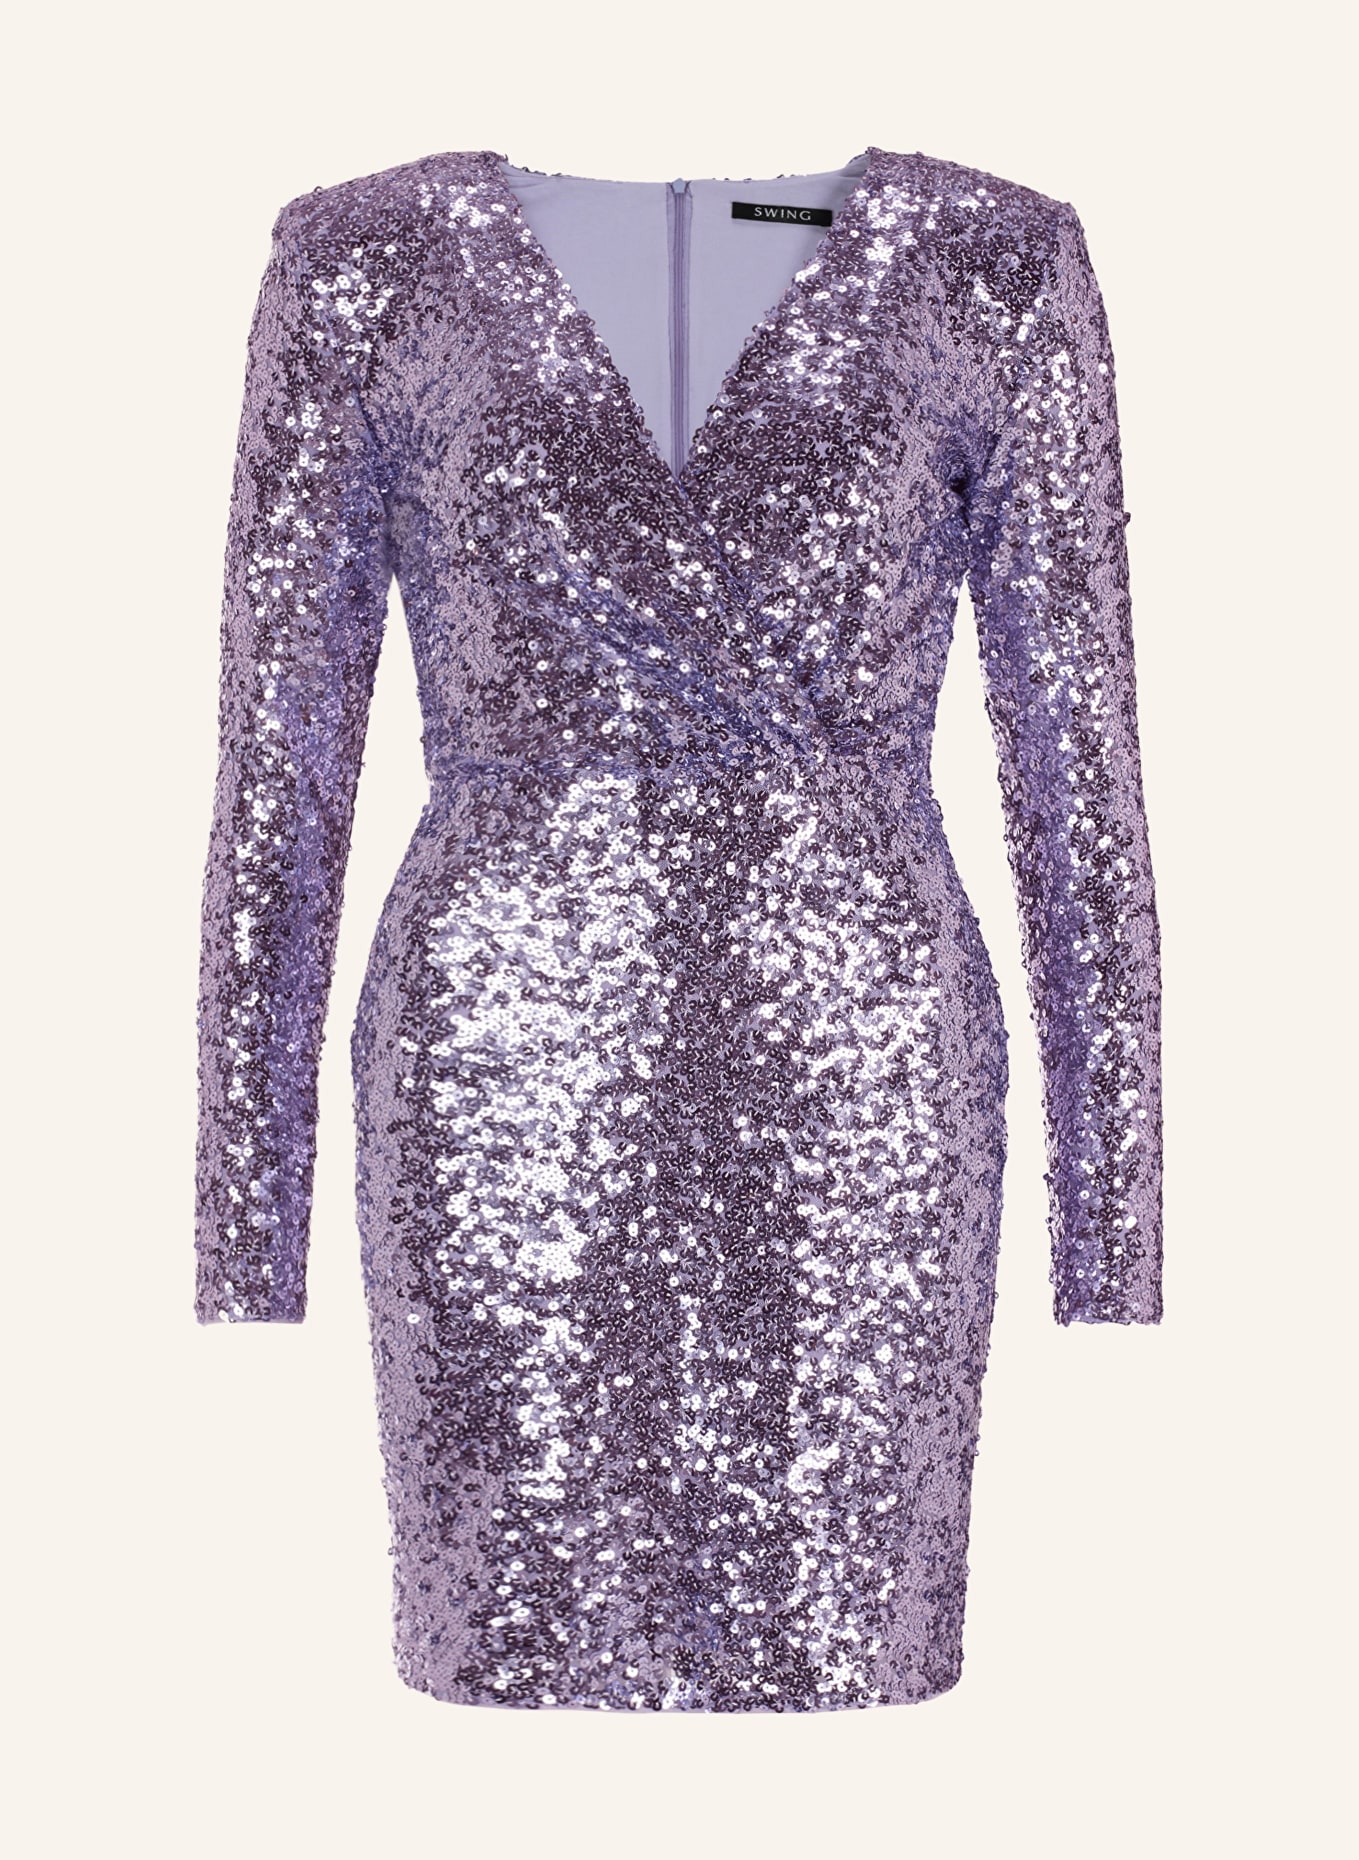 SWING Cocktail dress with sequins, Color: PURPLE (Image 1)